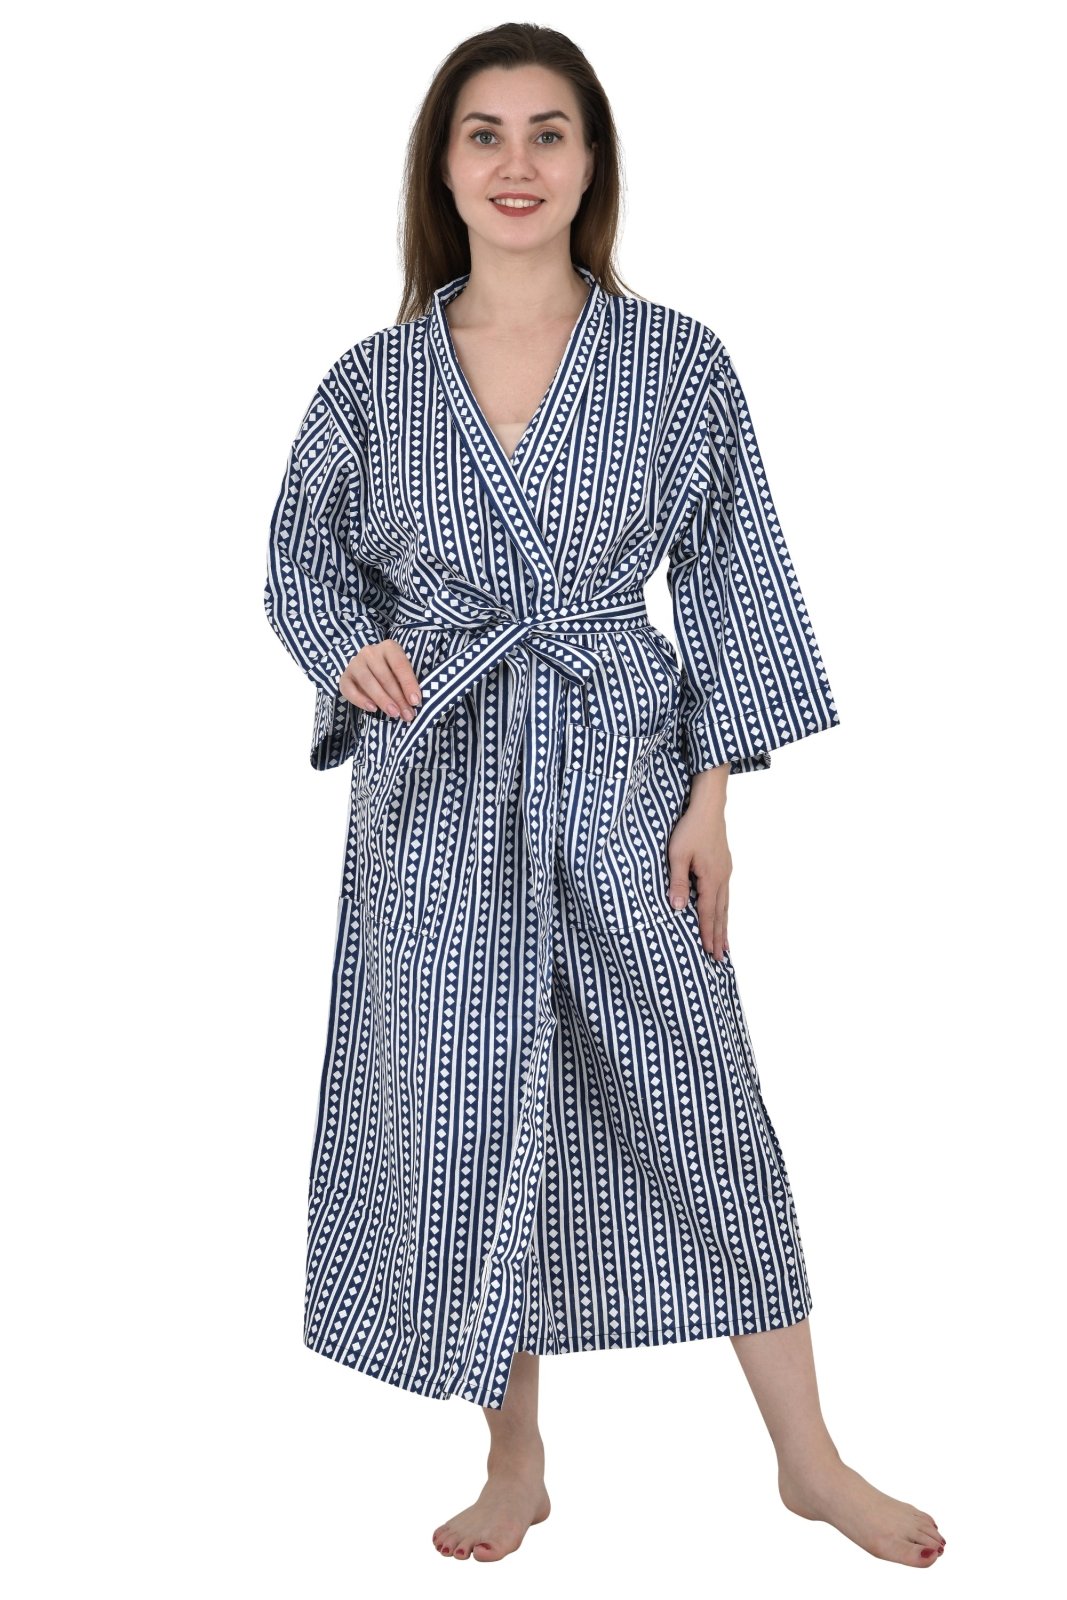 House Robe Summer Kimono Pure Cotton Indian Block Printed For Her | Anniversary Gift Beach Coverup/Comfy Maternity Mom | Blue Diamonds - The Eastern Loom